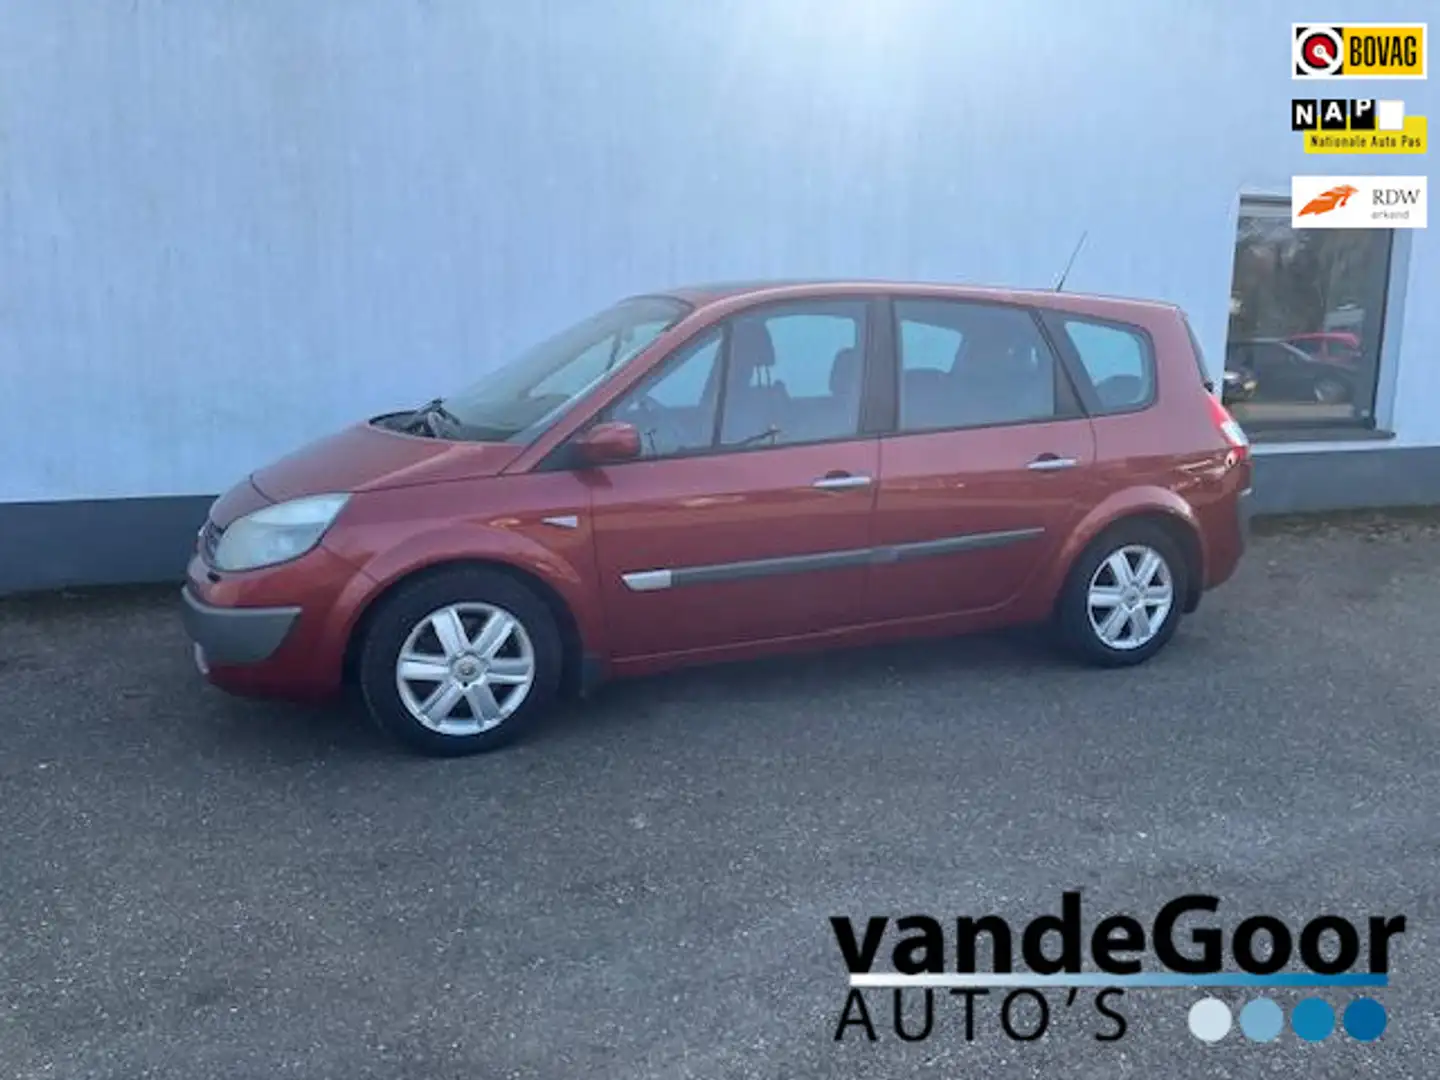 Renault Grand Scenic 2.0-16V Tech Line, '05, 7-pers, nette, luxe auto m Rood - 1